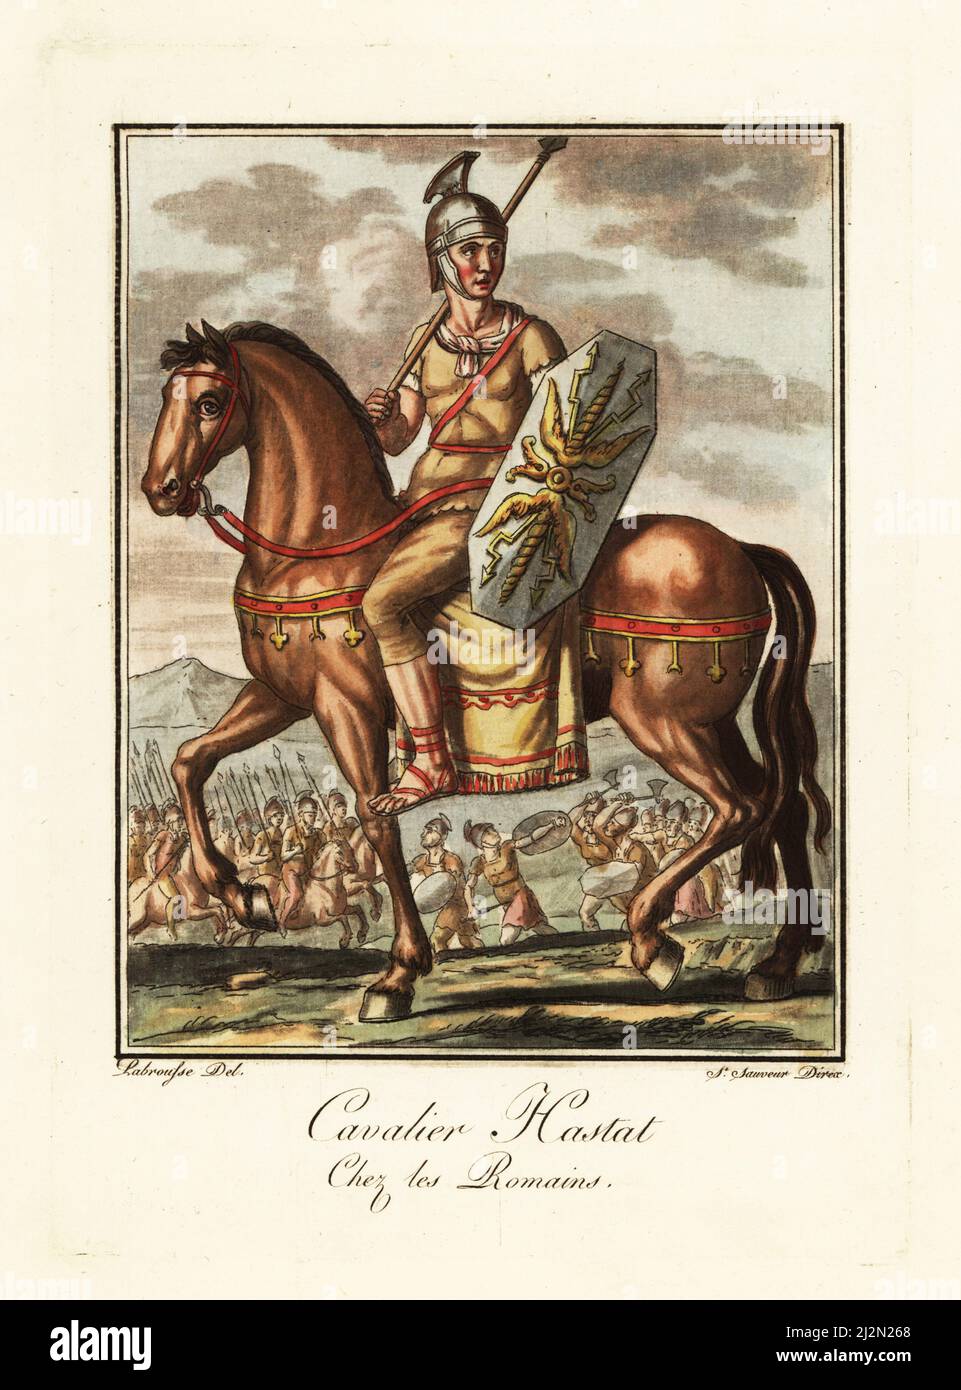 Roman hastatus or mounted lancer, ancient Rome. Mounted on a horse, wearing galea helmet, tunic, baldric belt, sagulum gregale or short trousers. Armed with shield and spear. In the background, a cohort of lancers in battle. Cavalier Hastat chez les Romains. Handcoloured copperplate drawn and engraved by L. Labrousse, artist of Bordeaux, under the direction of Jacques Grasset de Saint-Sauveur from his L’antique Rome, ou description historique et pittoresque, Ancient Rome, or historical and picturesque description, Chez Deroy, Paris, 1796. Stock Photo